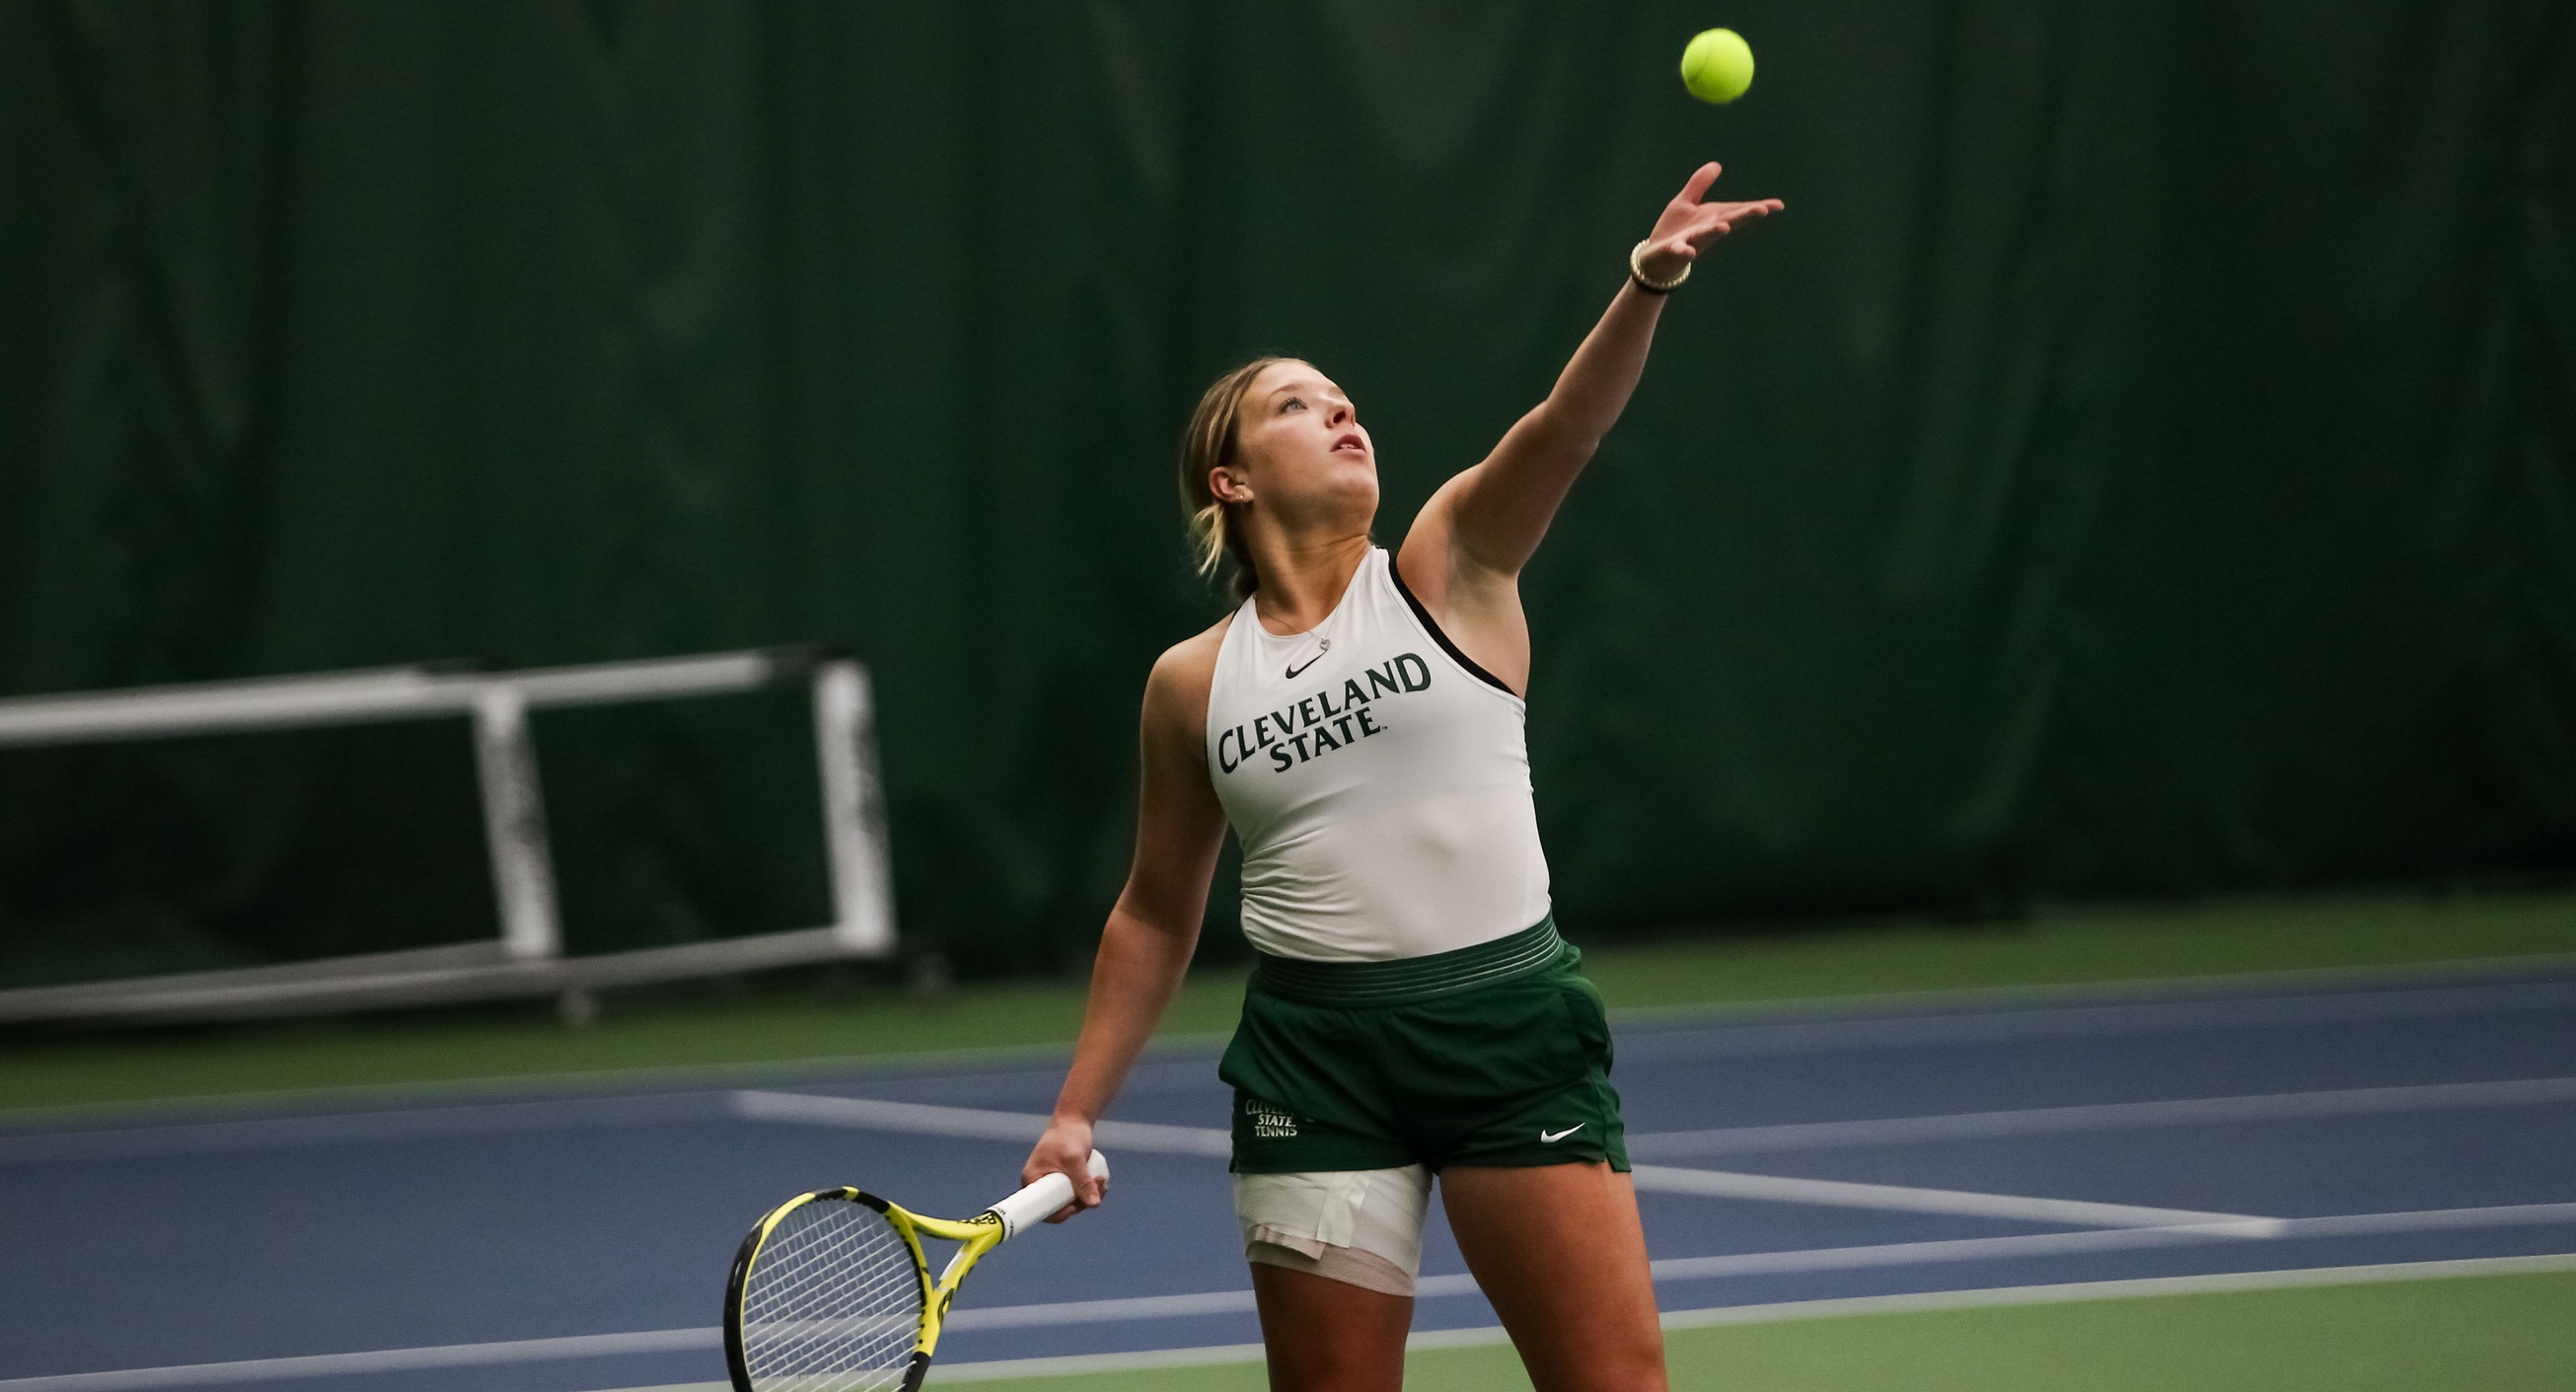 Cleveland State Women’s Tennis Opens Spring Season With 5-2 Victory Over Valparaiso